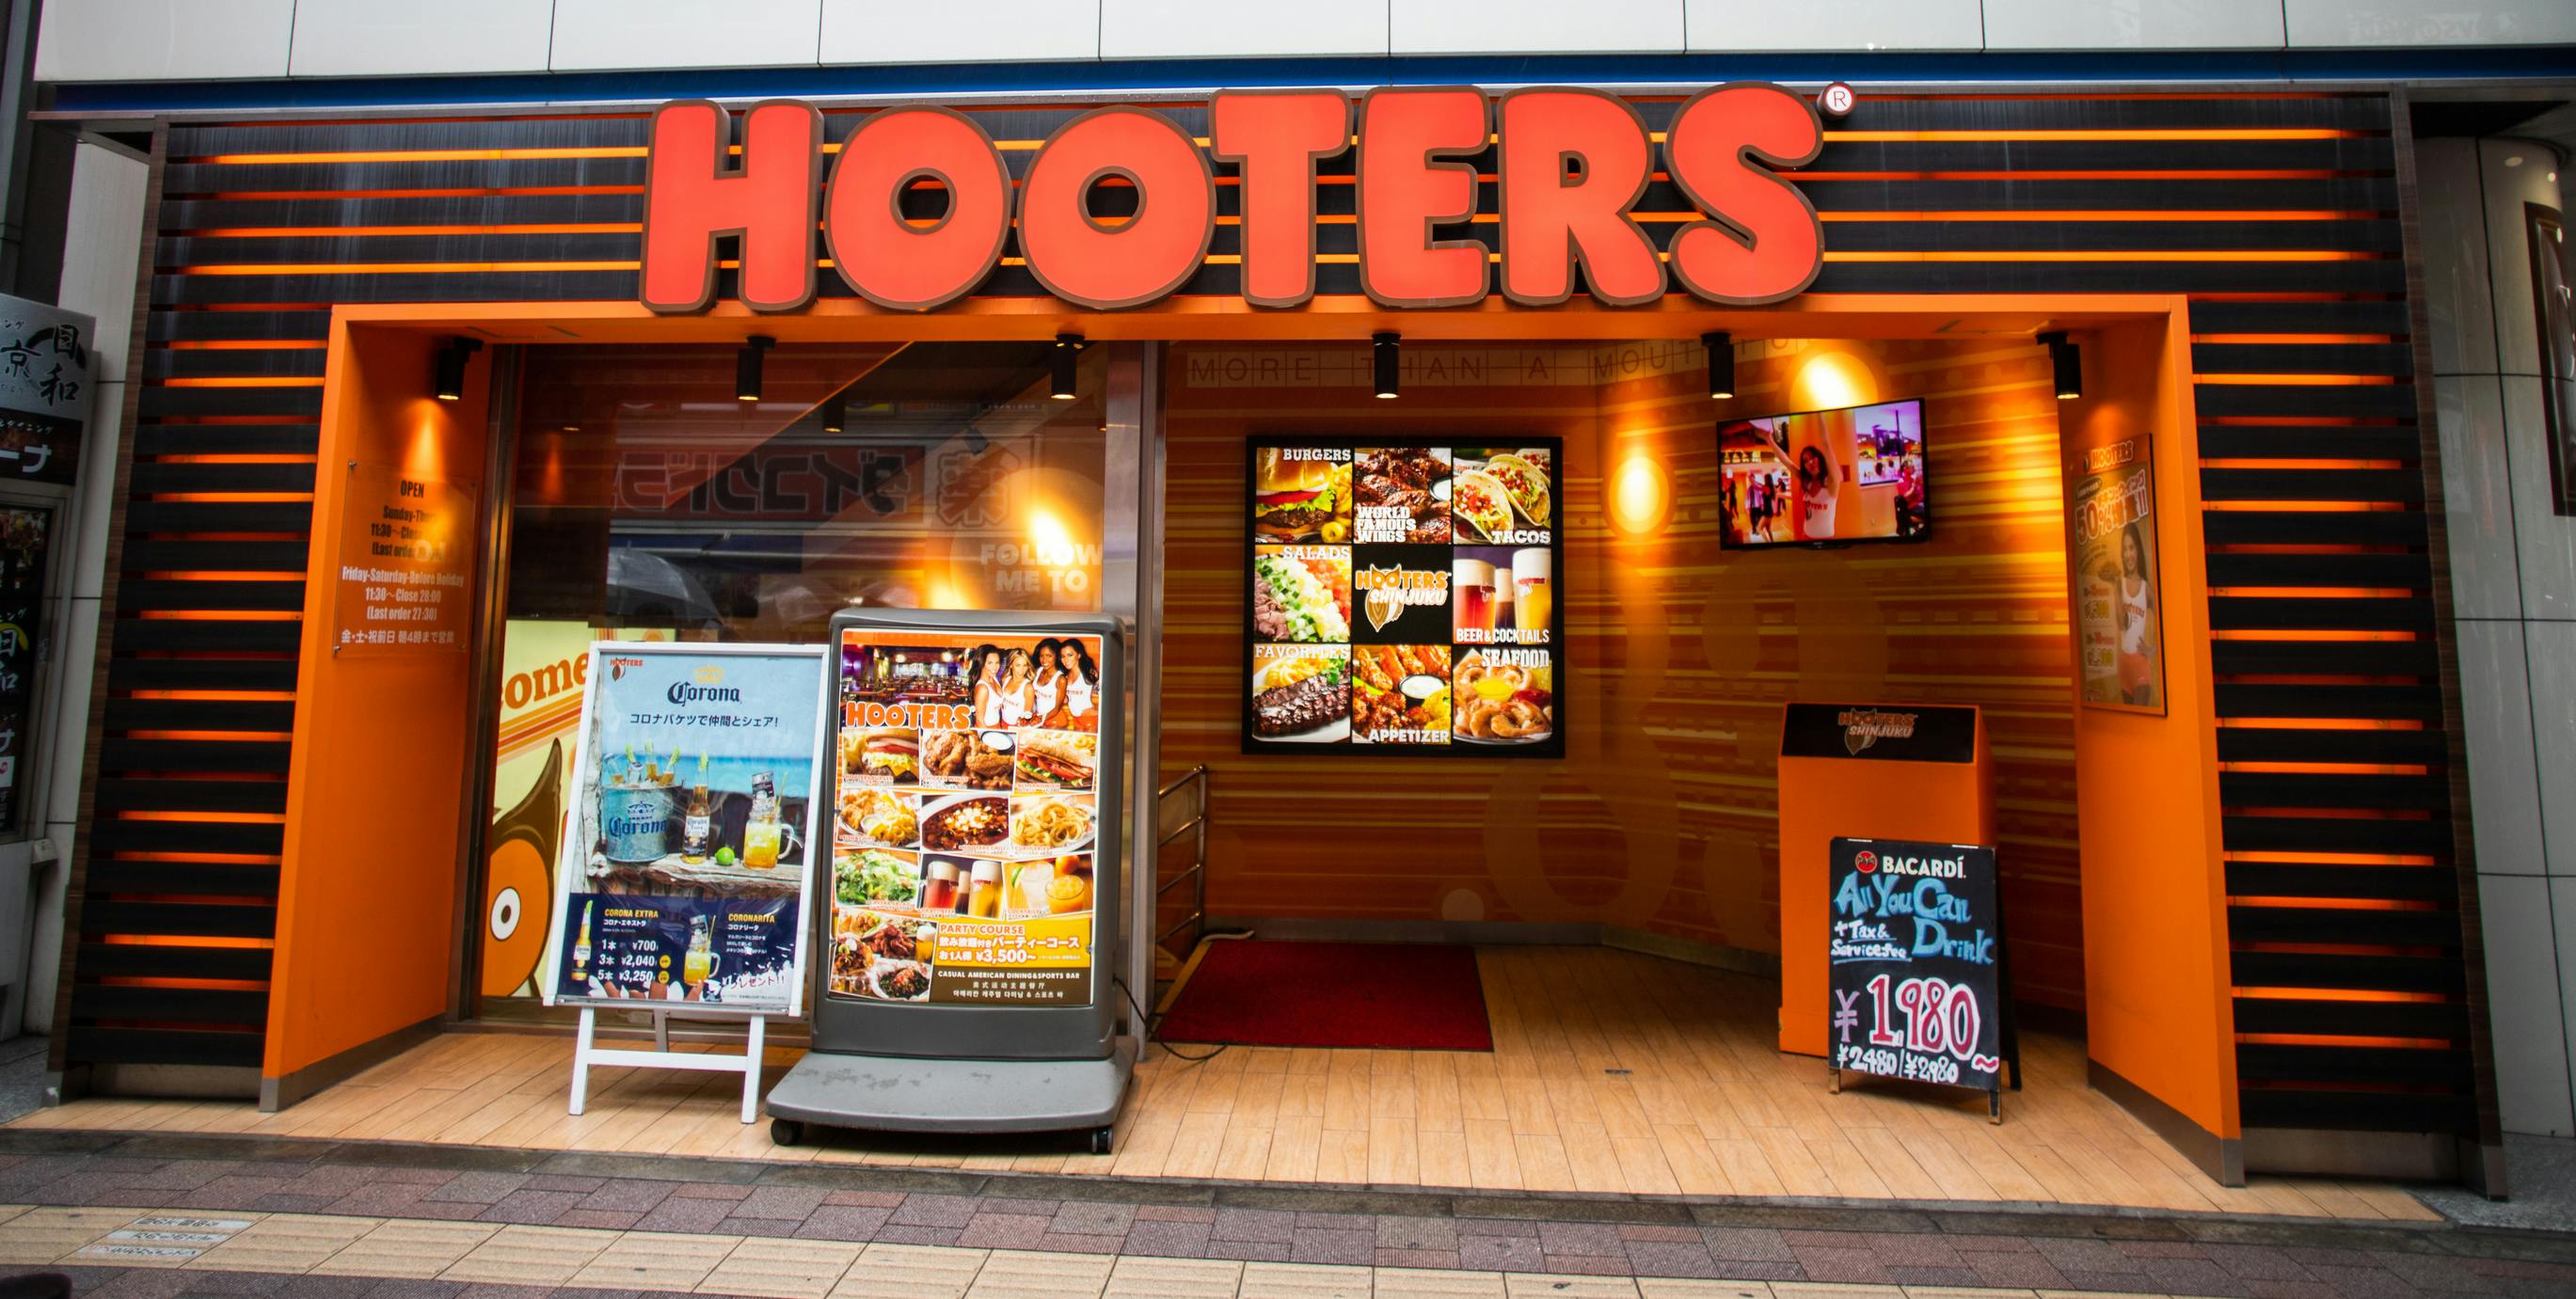 A Hooter's franchise entryway